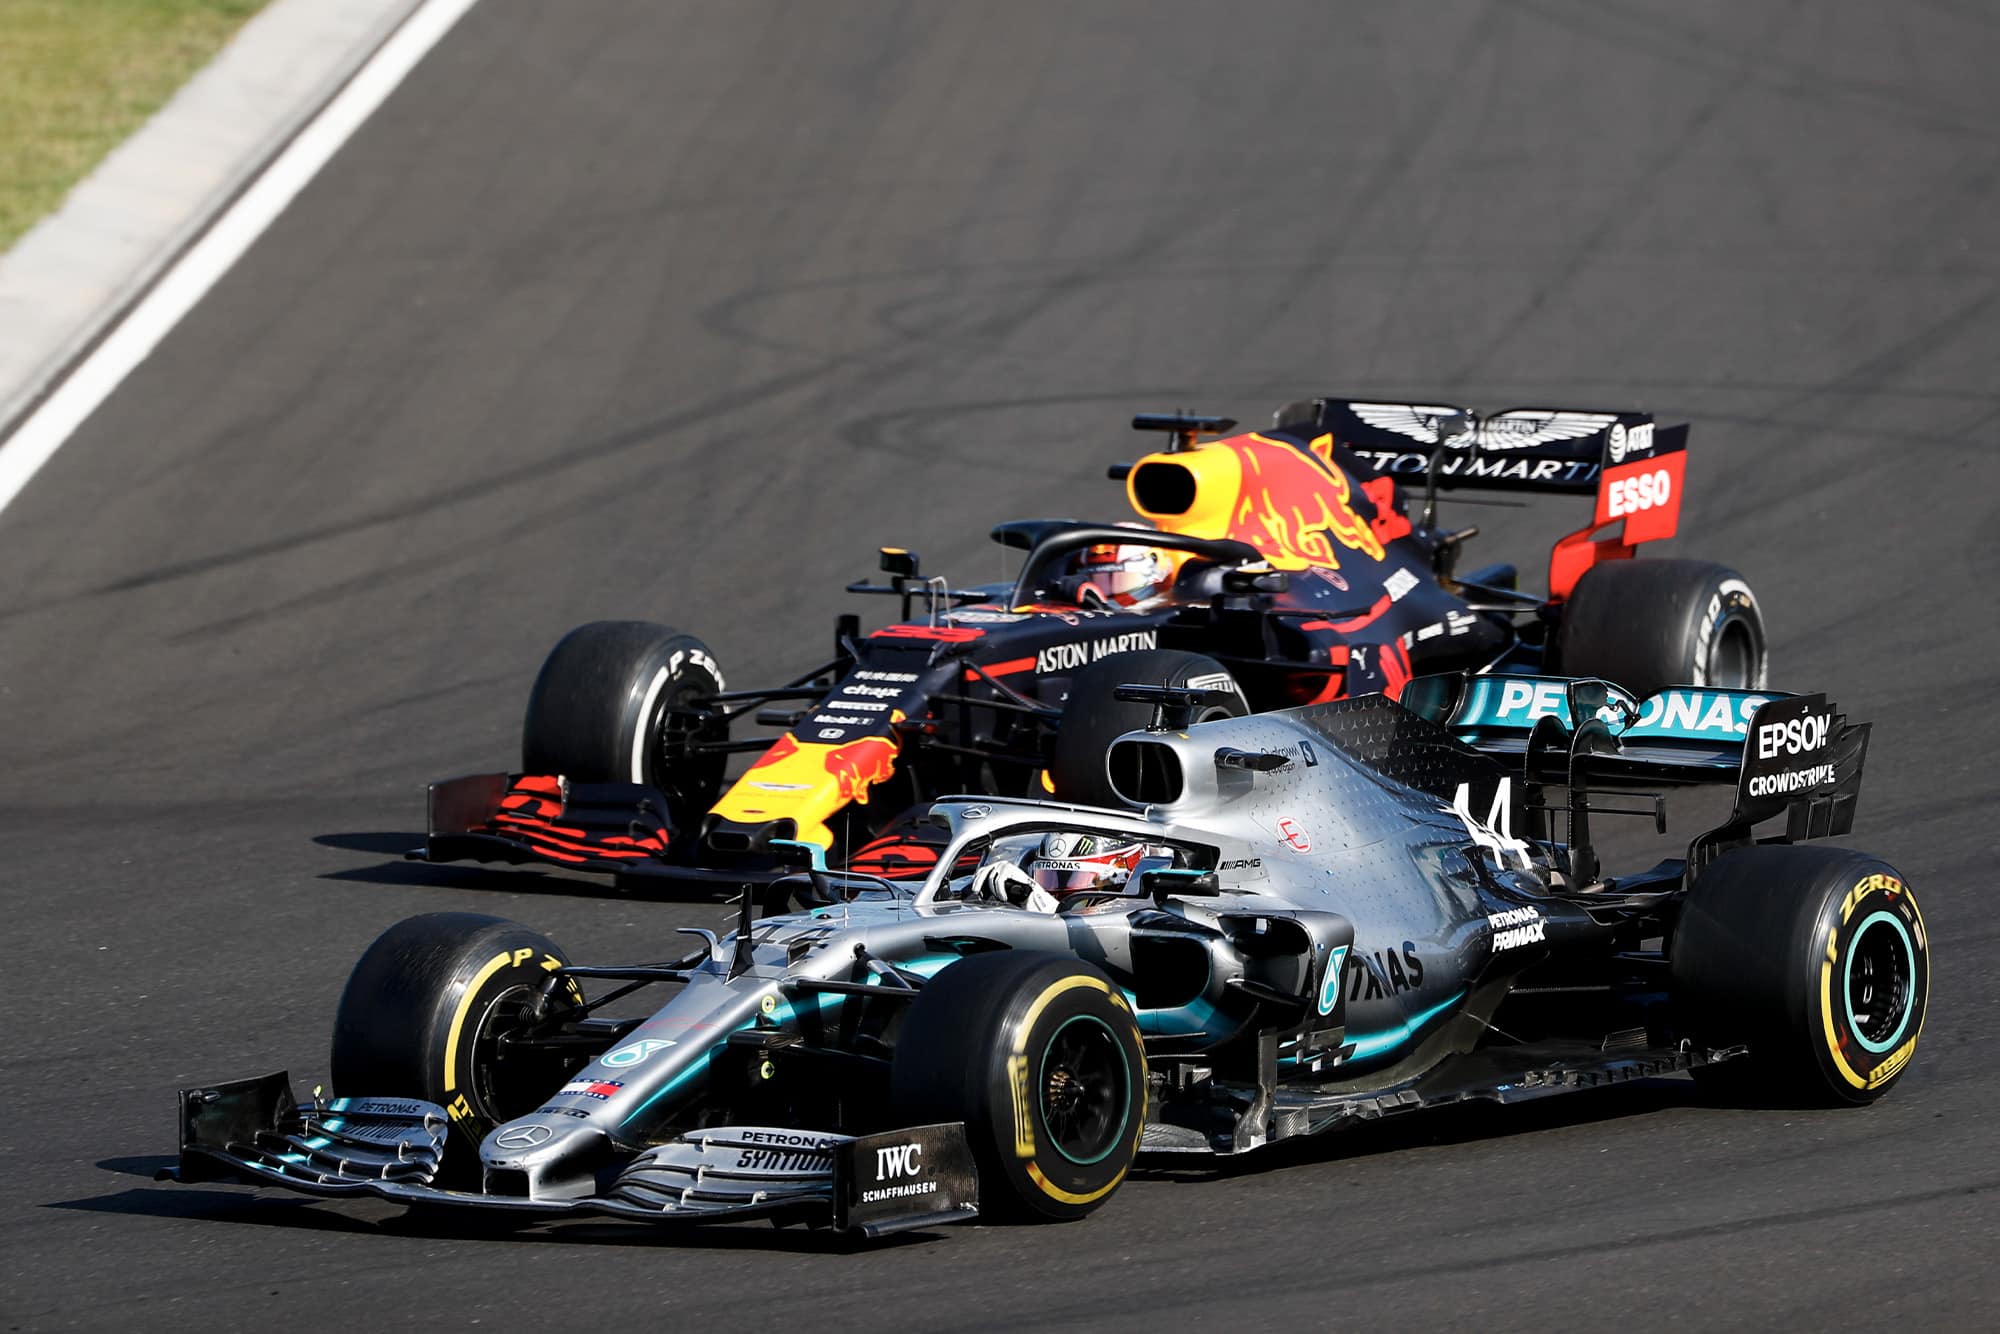 Lewis Hamilton overtakes Max Verstappen for the lead of the 2019 Hungarian Grand Prix